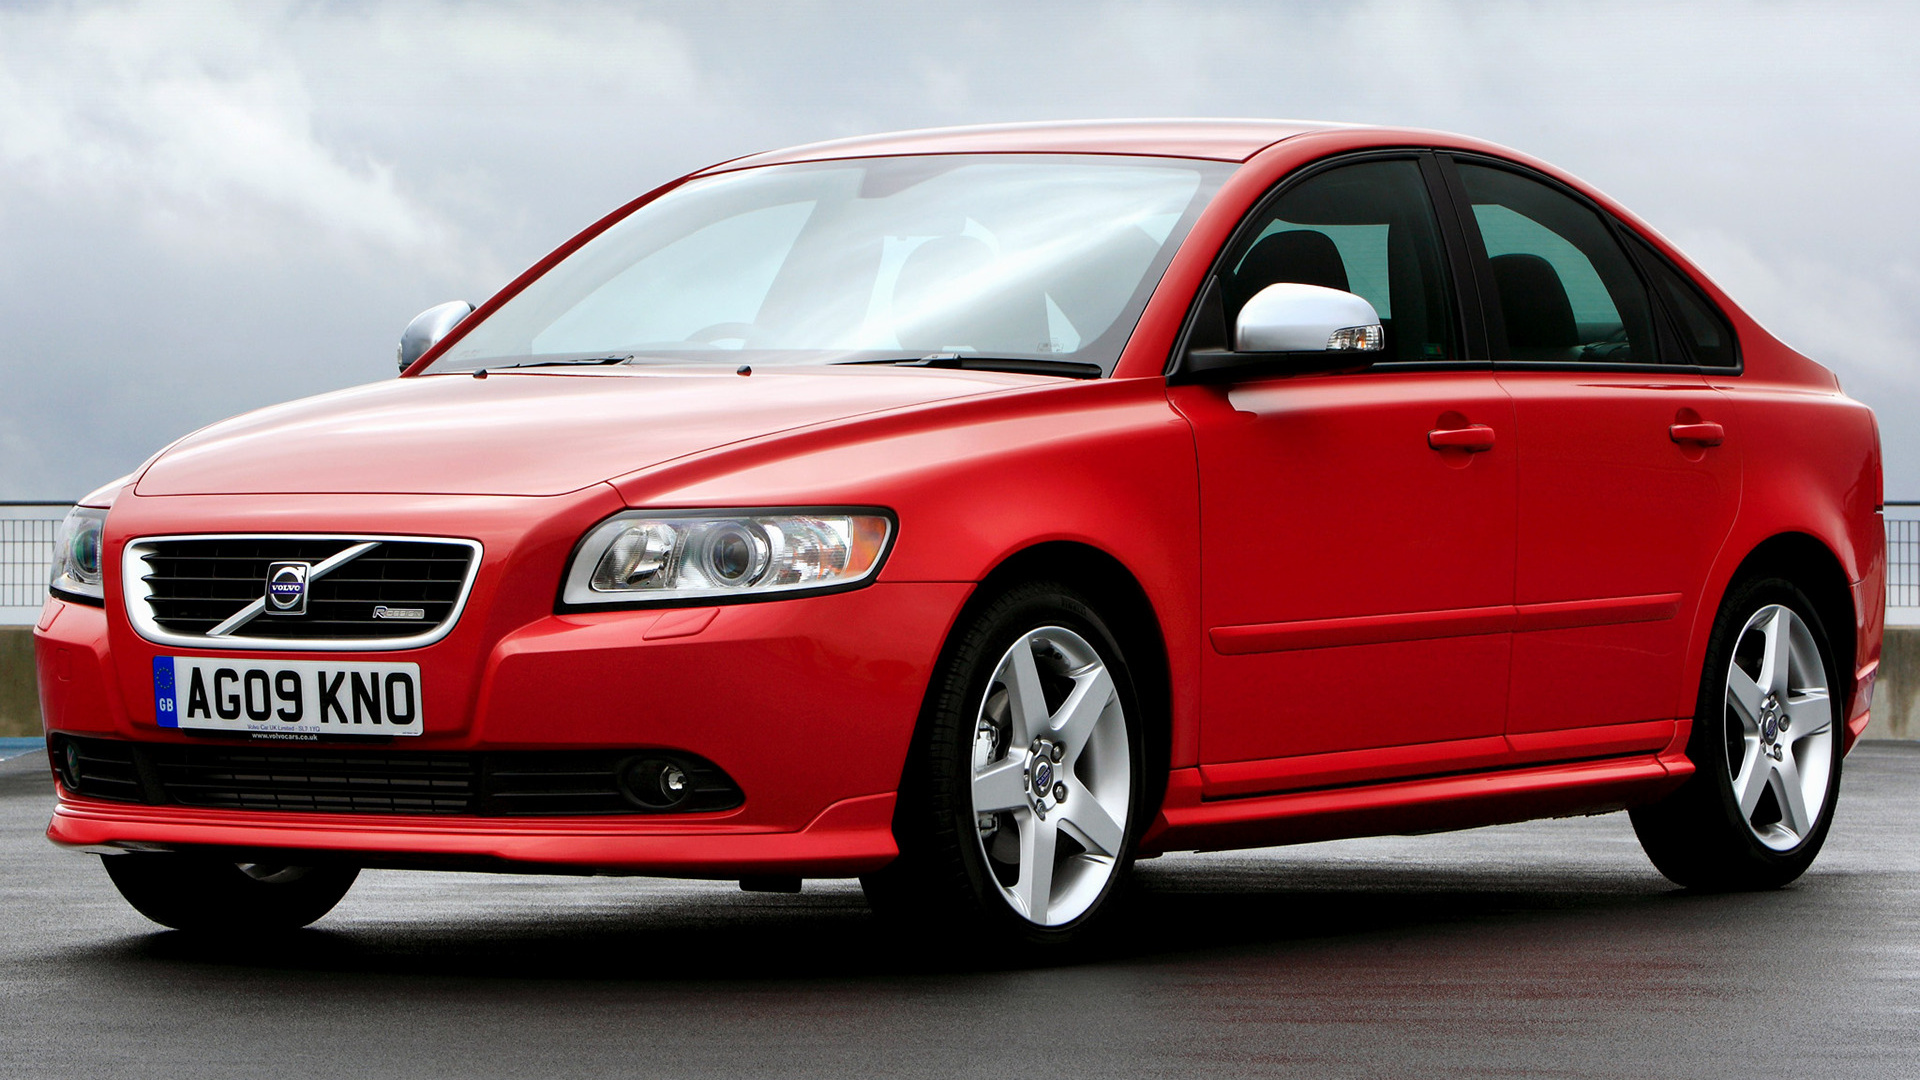 2008 Volvo S40 RDesign (UK) Wallpapers and HD Images